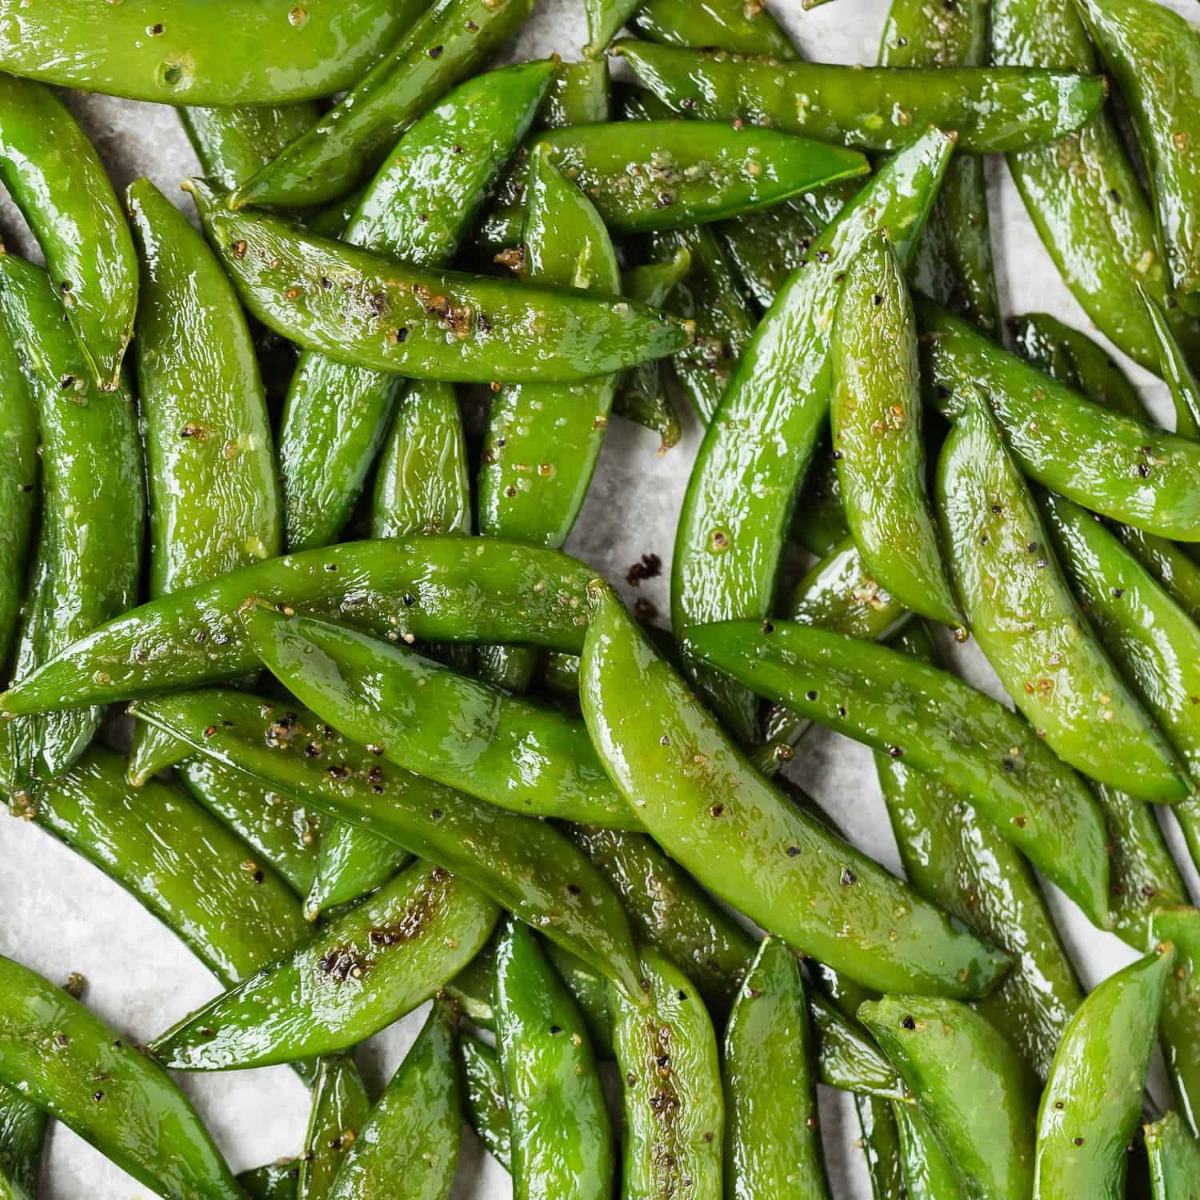 https://storables.com/wp-content/uploads/2023/09/how-to-store-sugar-snap-peas-1695567612.jpg